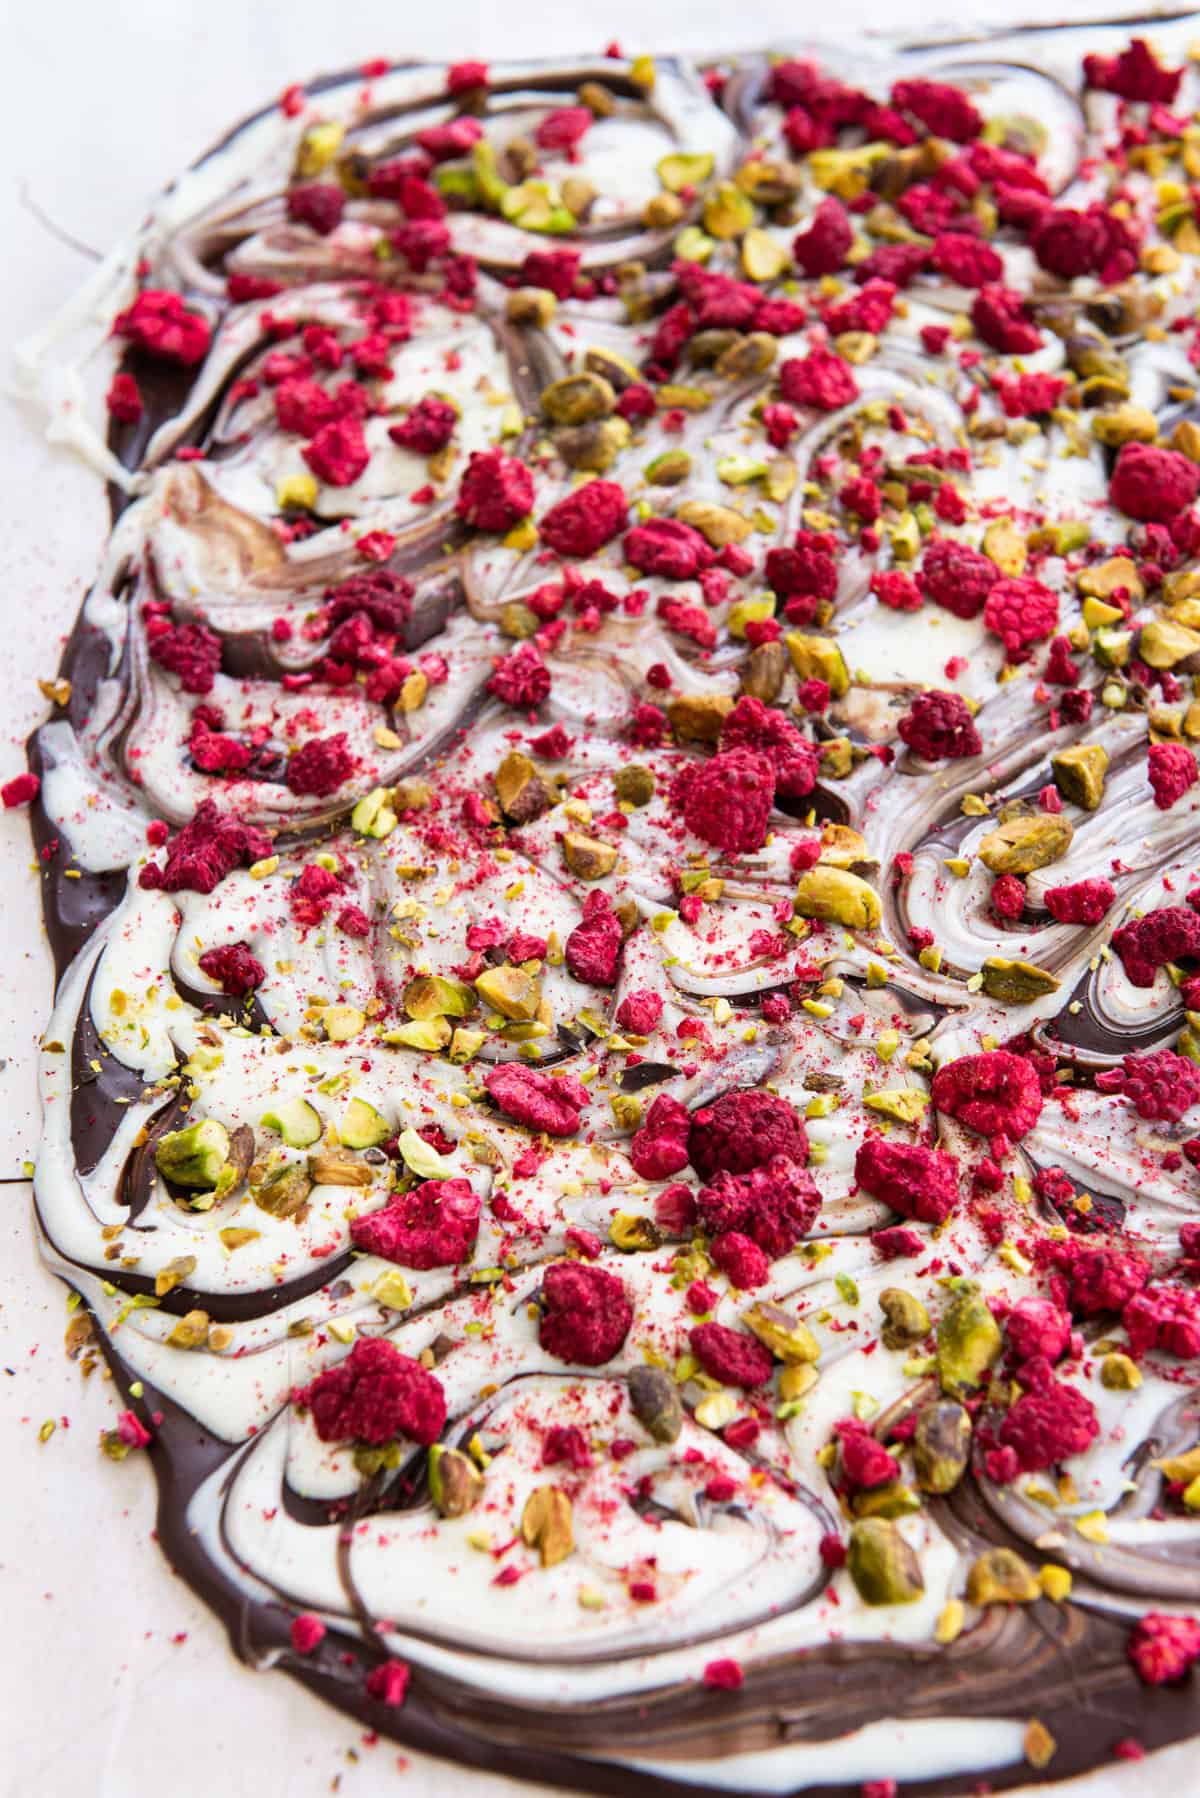 Slab of Chocolate Bark with Raspberries and Pistachios